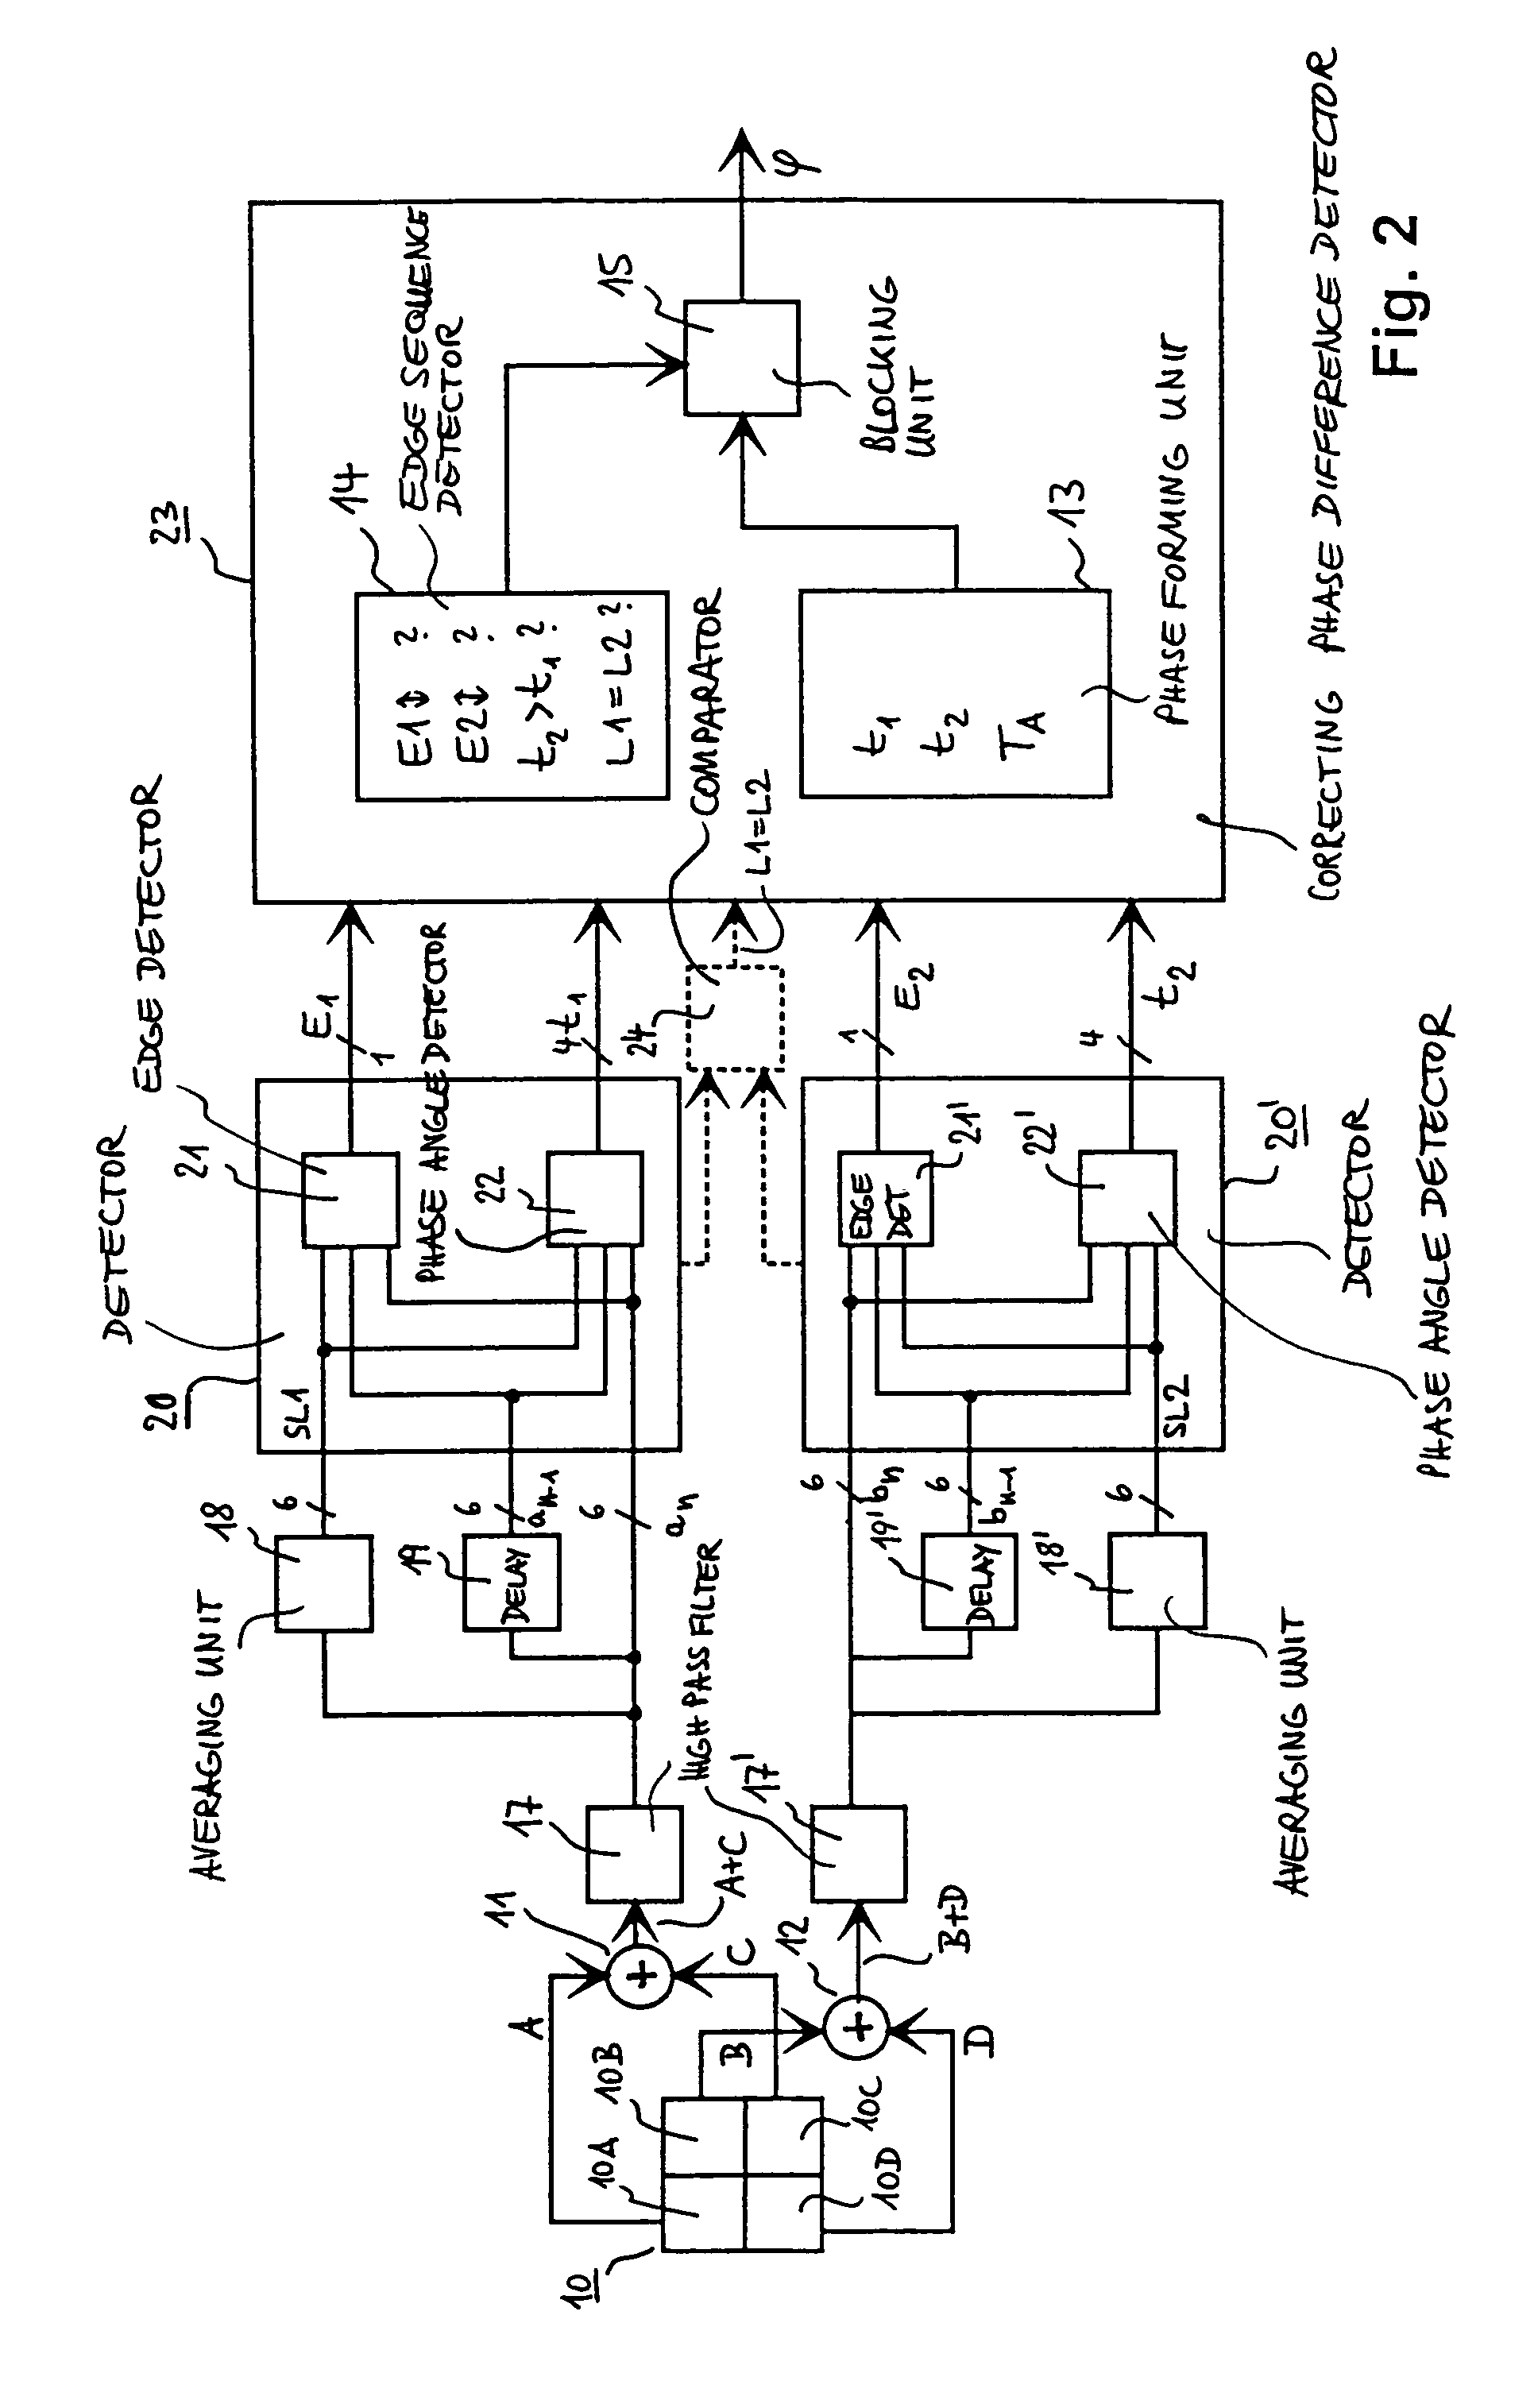 Apparatus for scanning optical recording media using a differential phase detection method